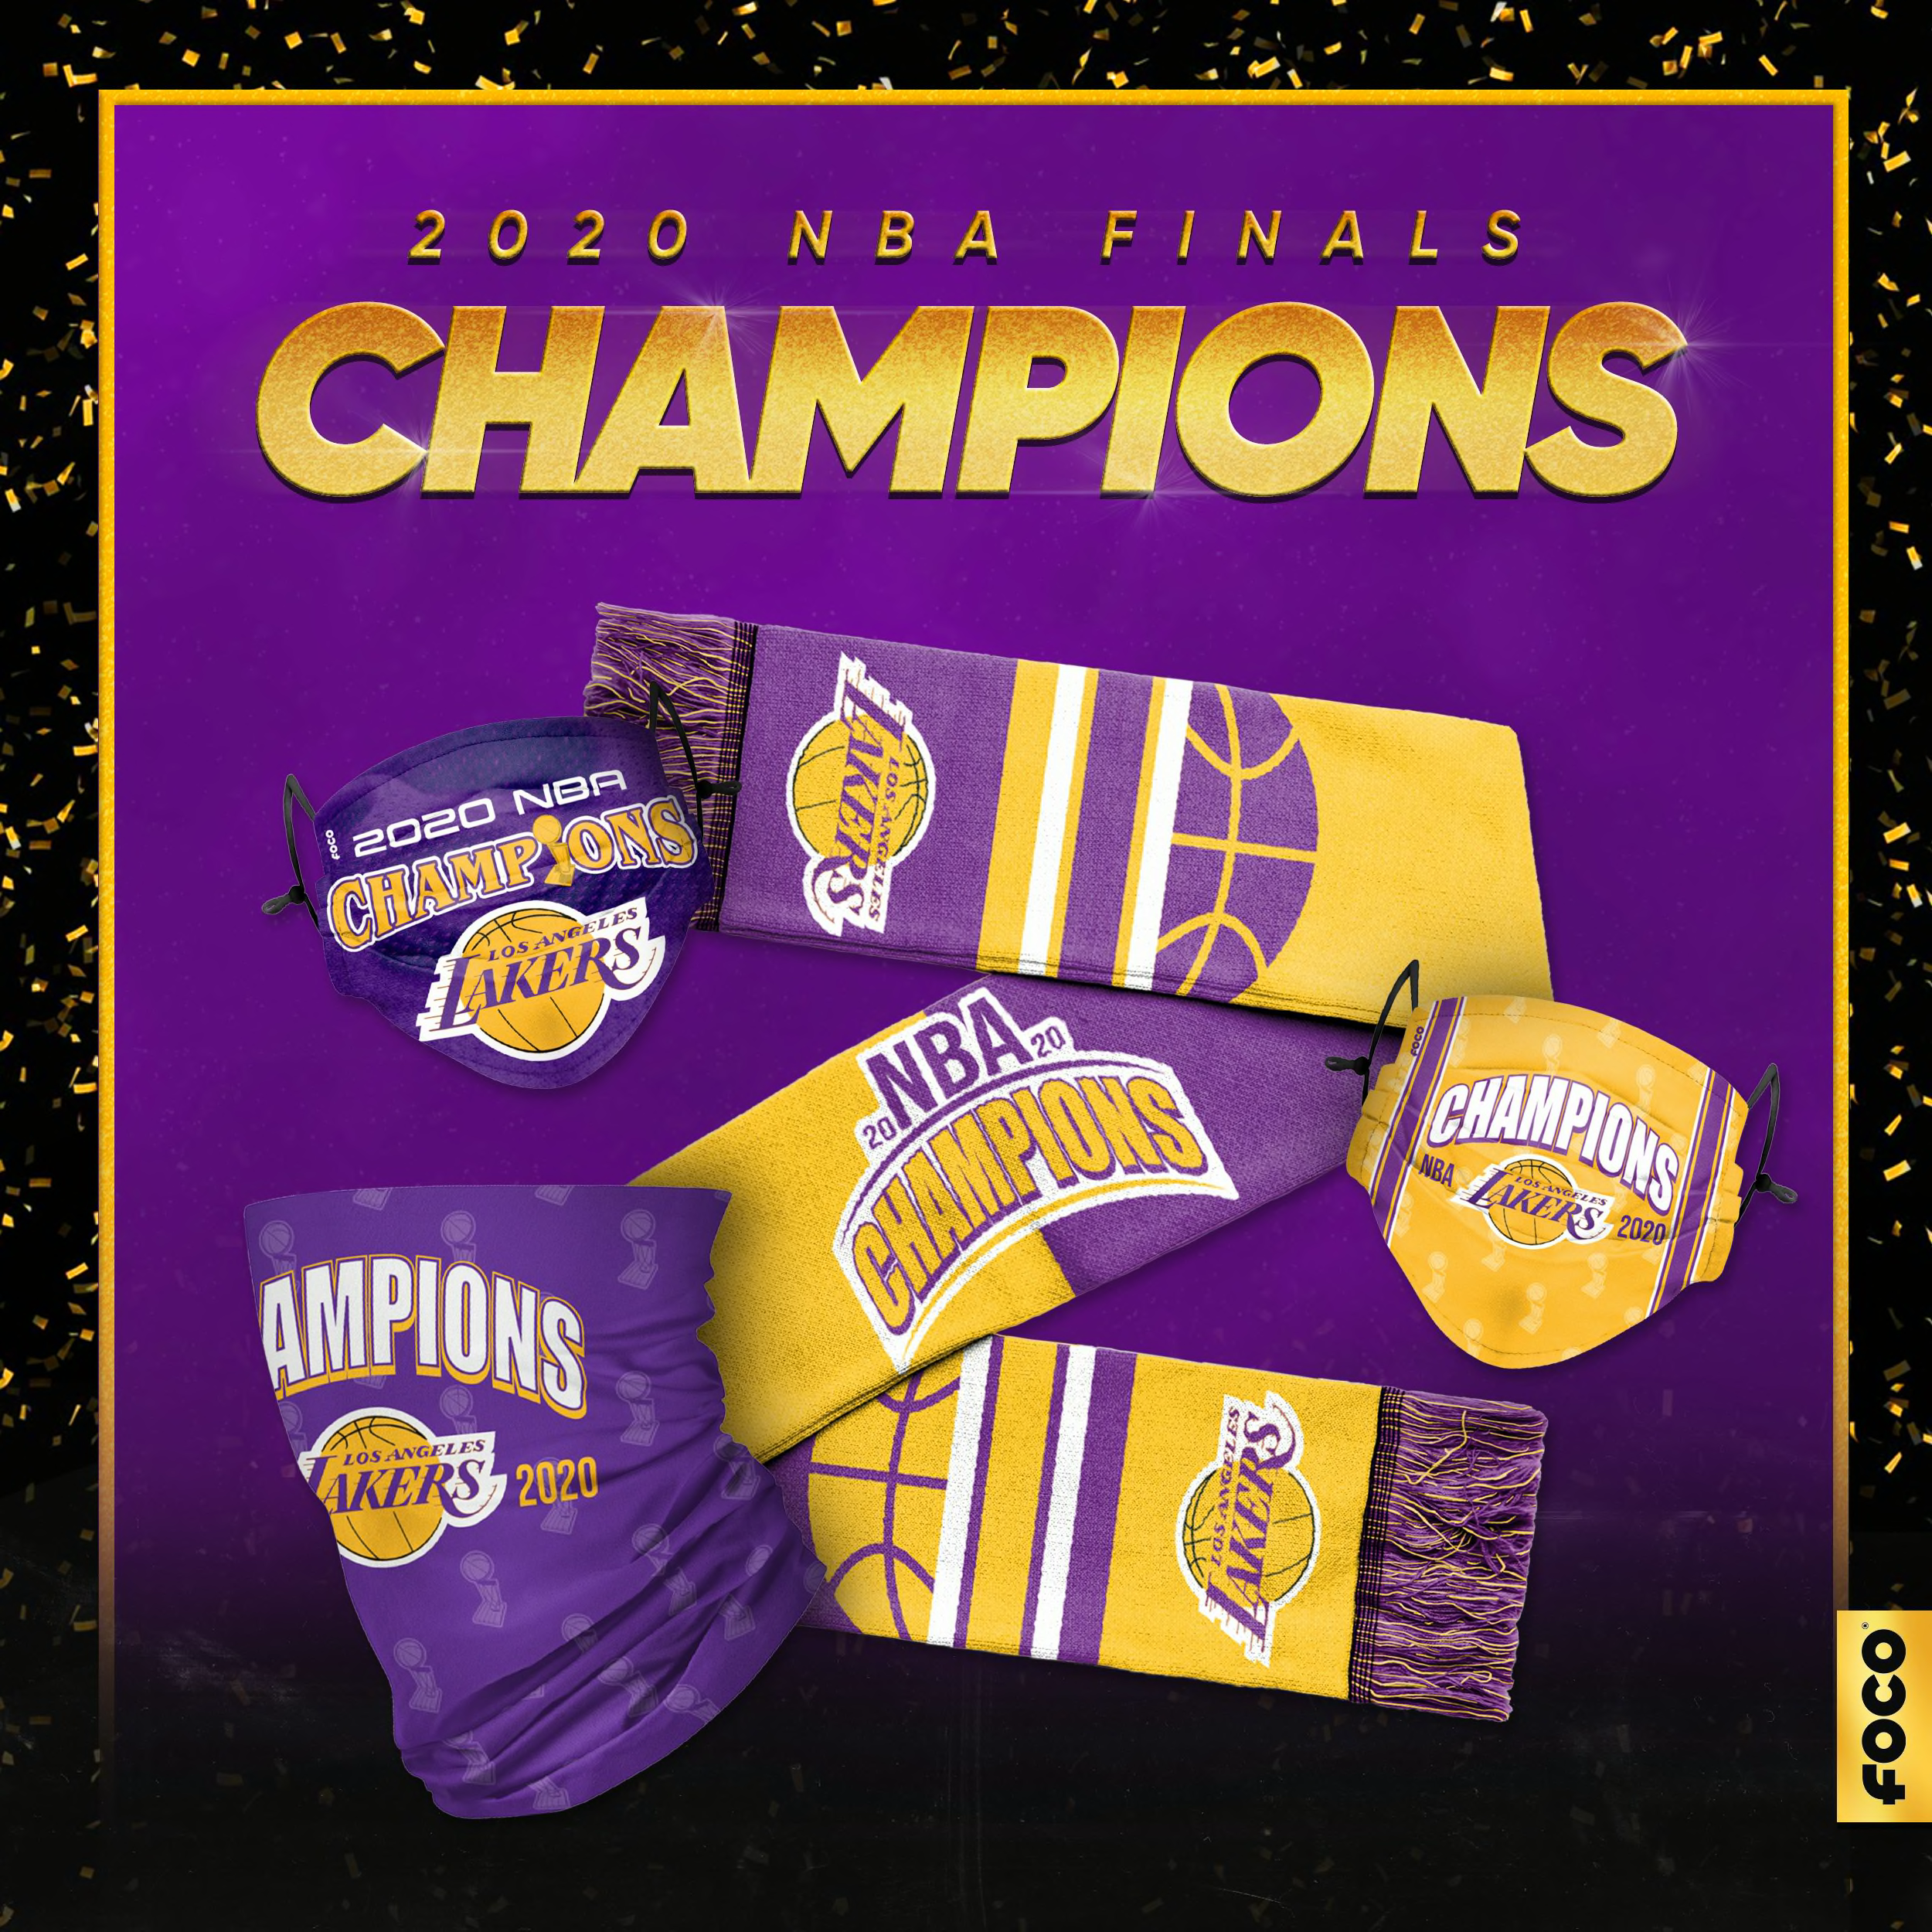 Celebrate the Los Angeles Lakers NBA Championship with new gear